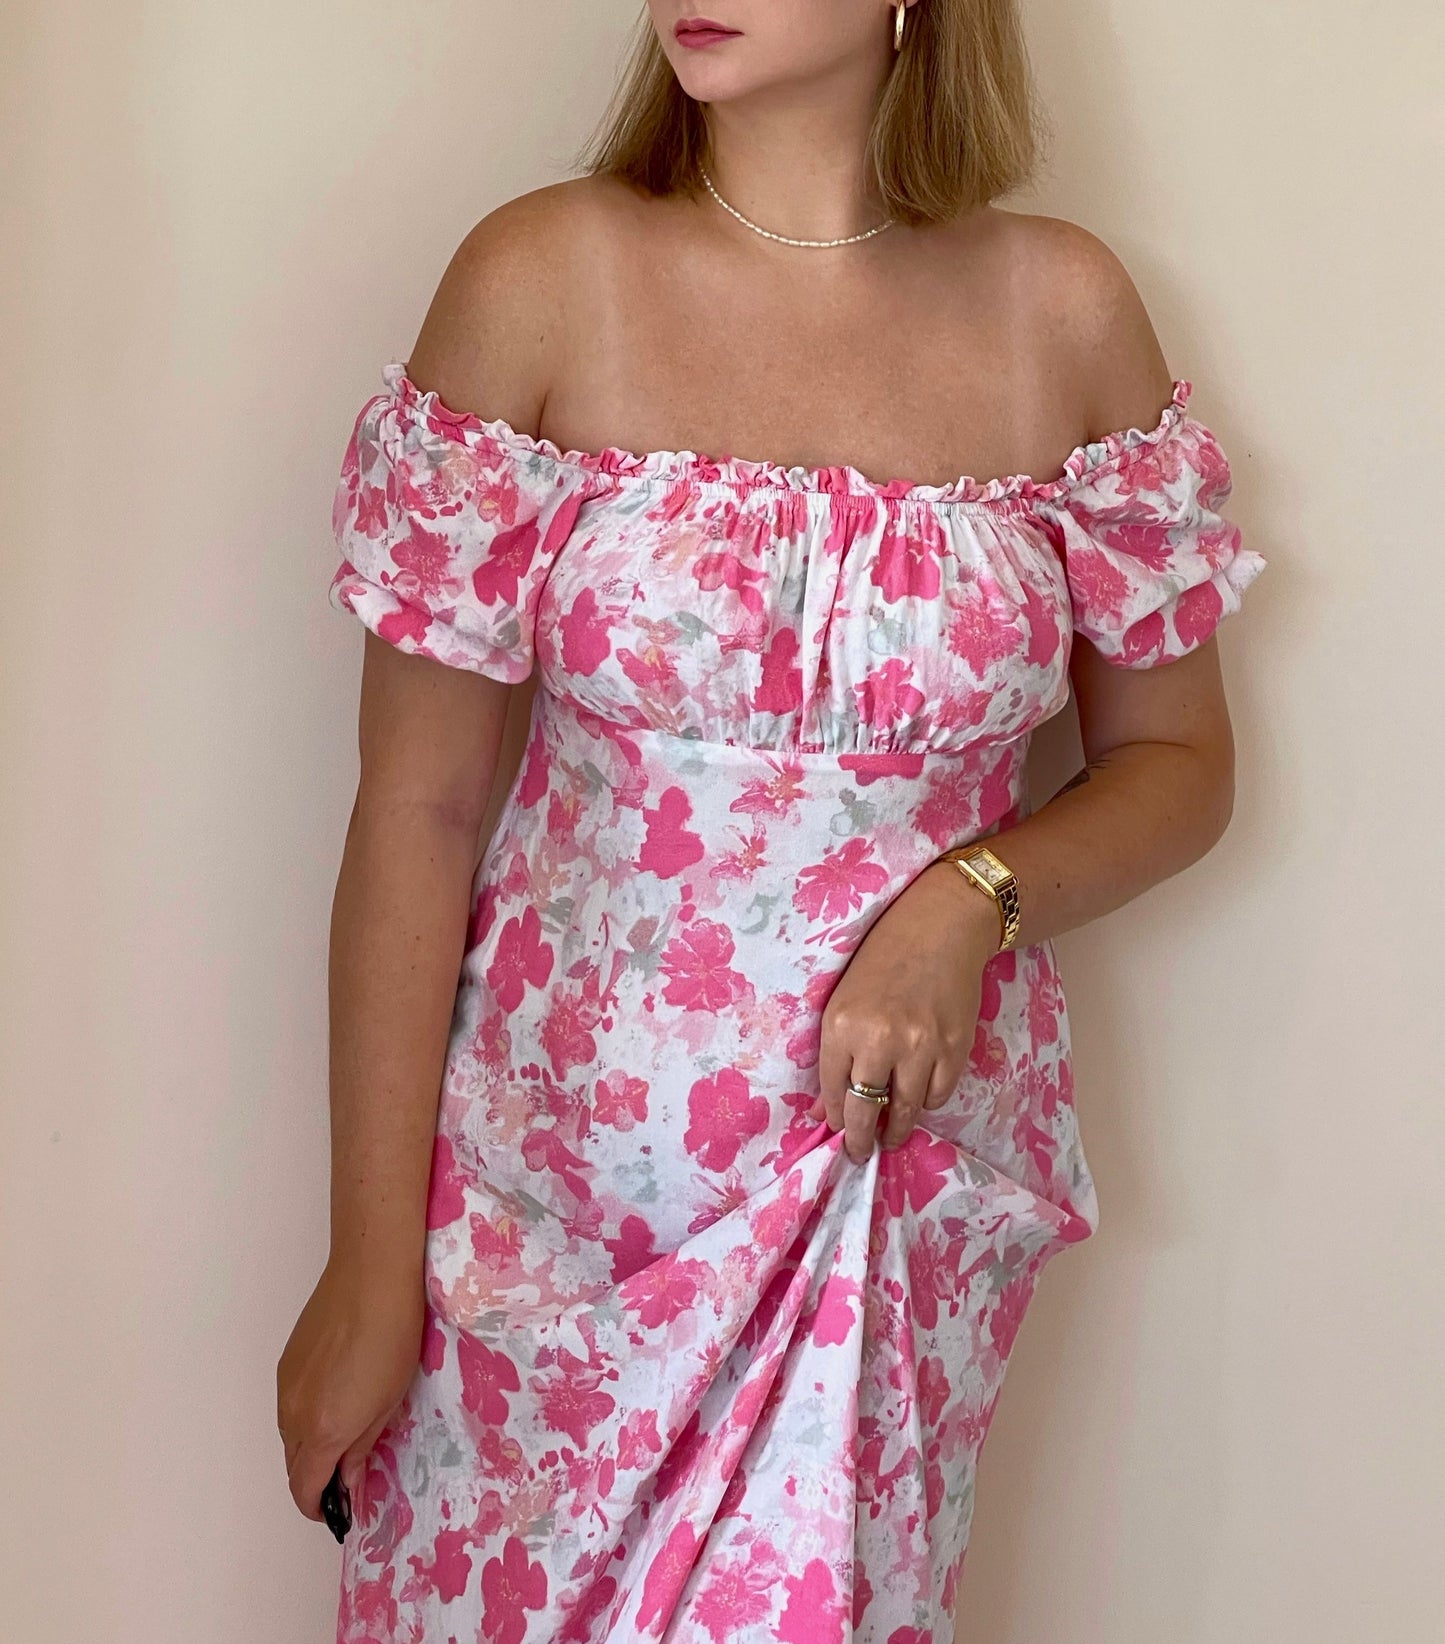 Cute light viscose dress with floral print